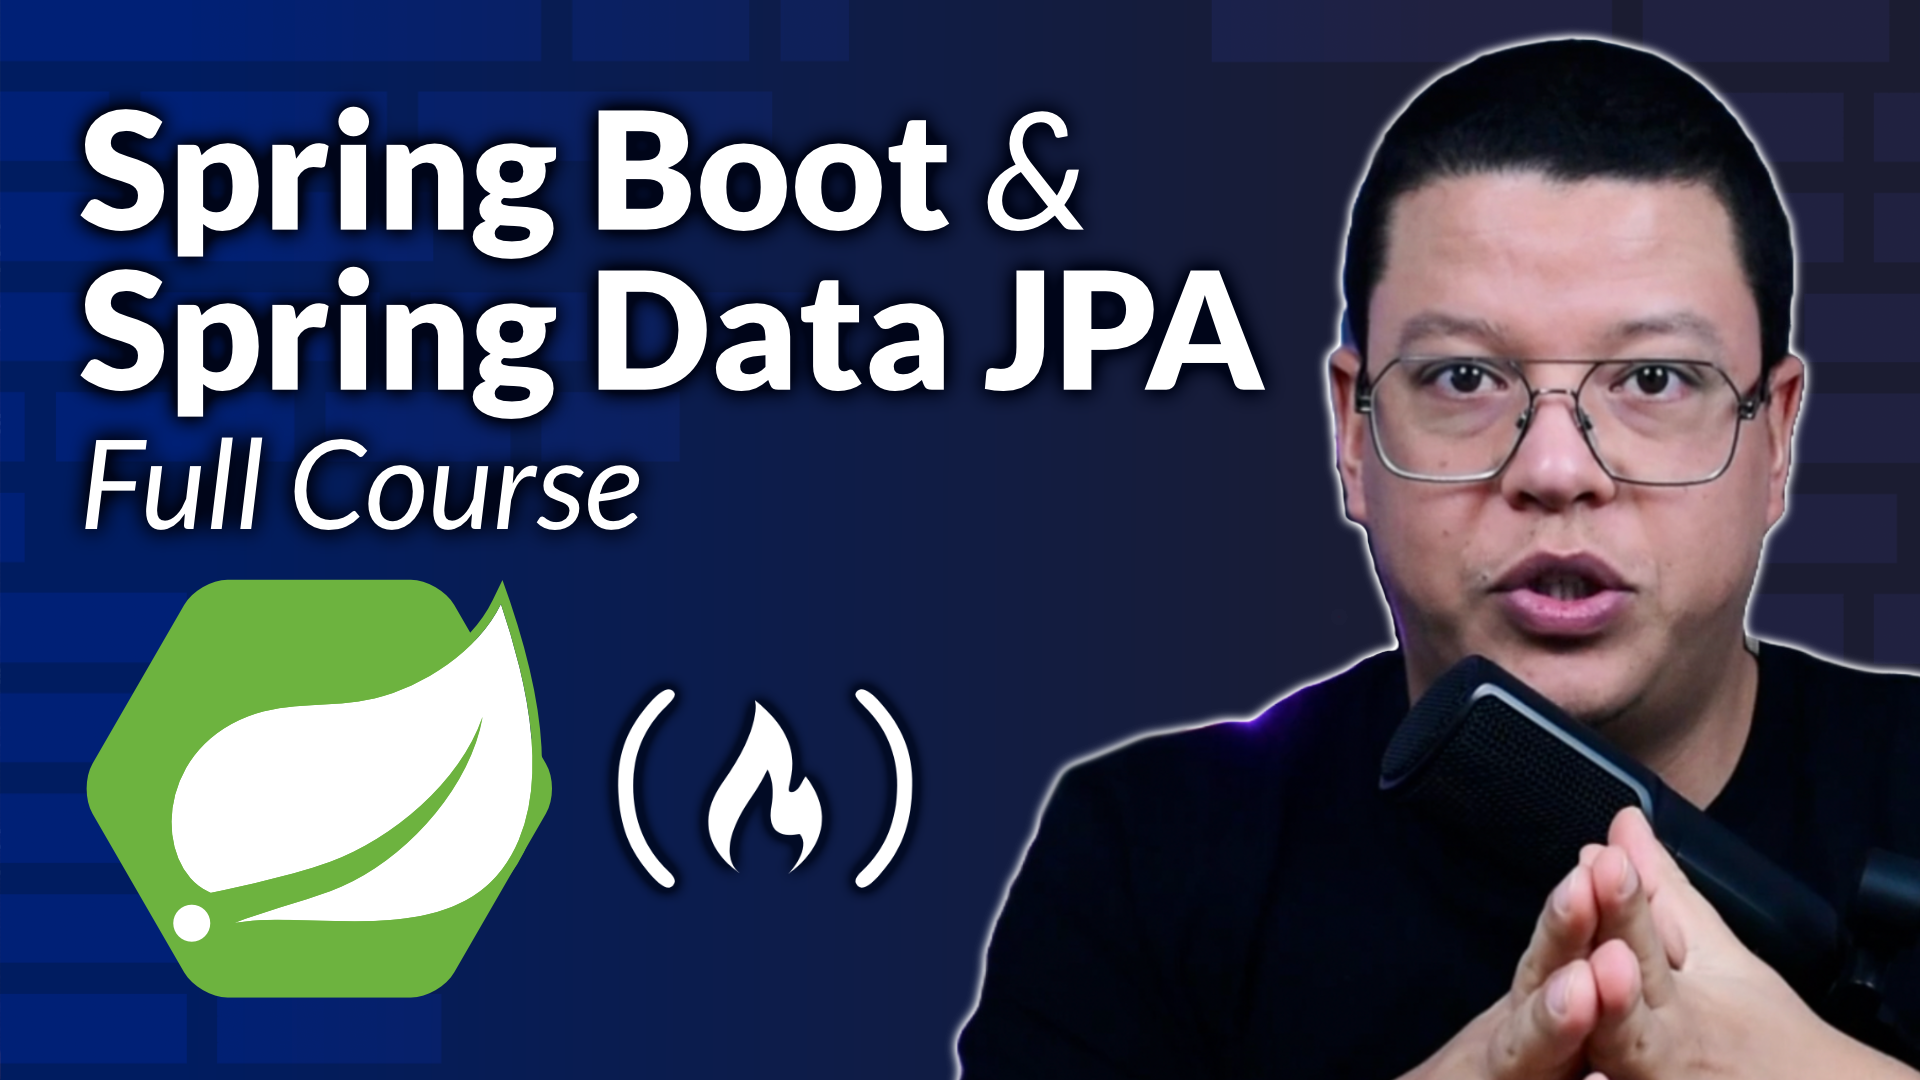 Learn Spring Boot and Spring Data JPA